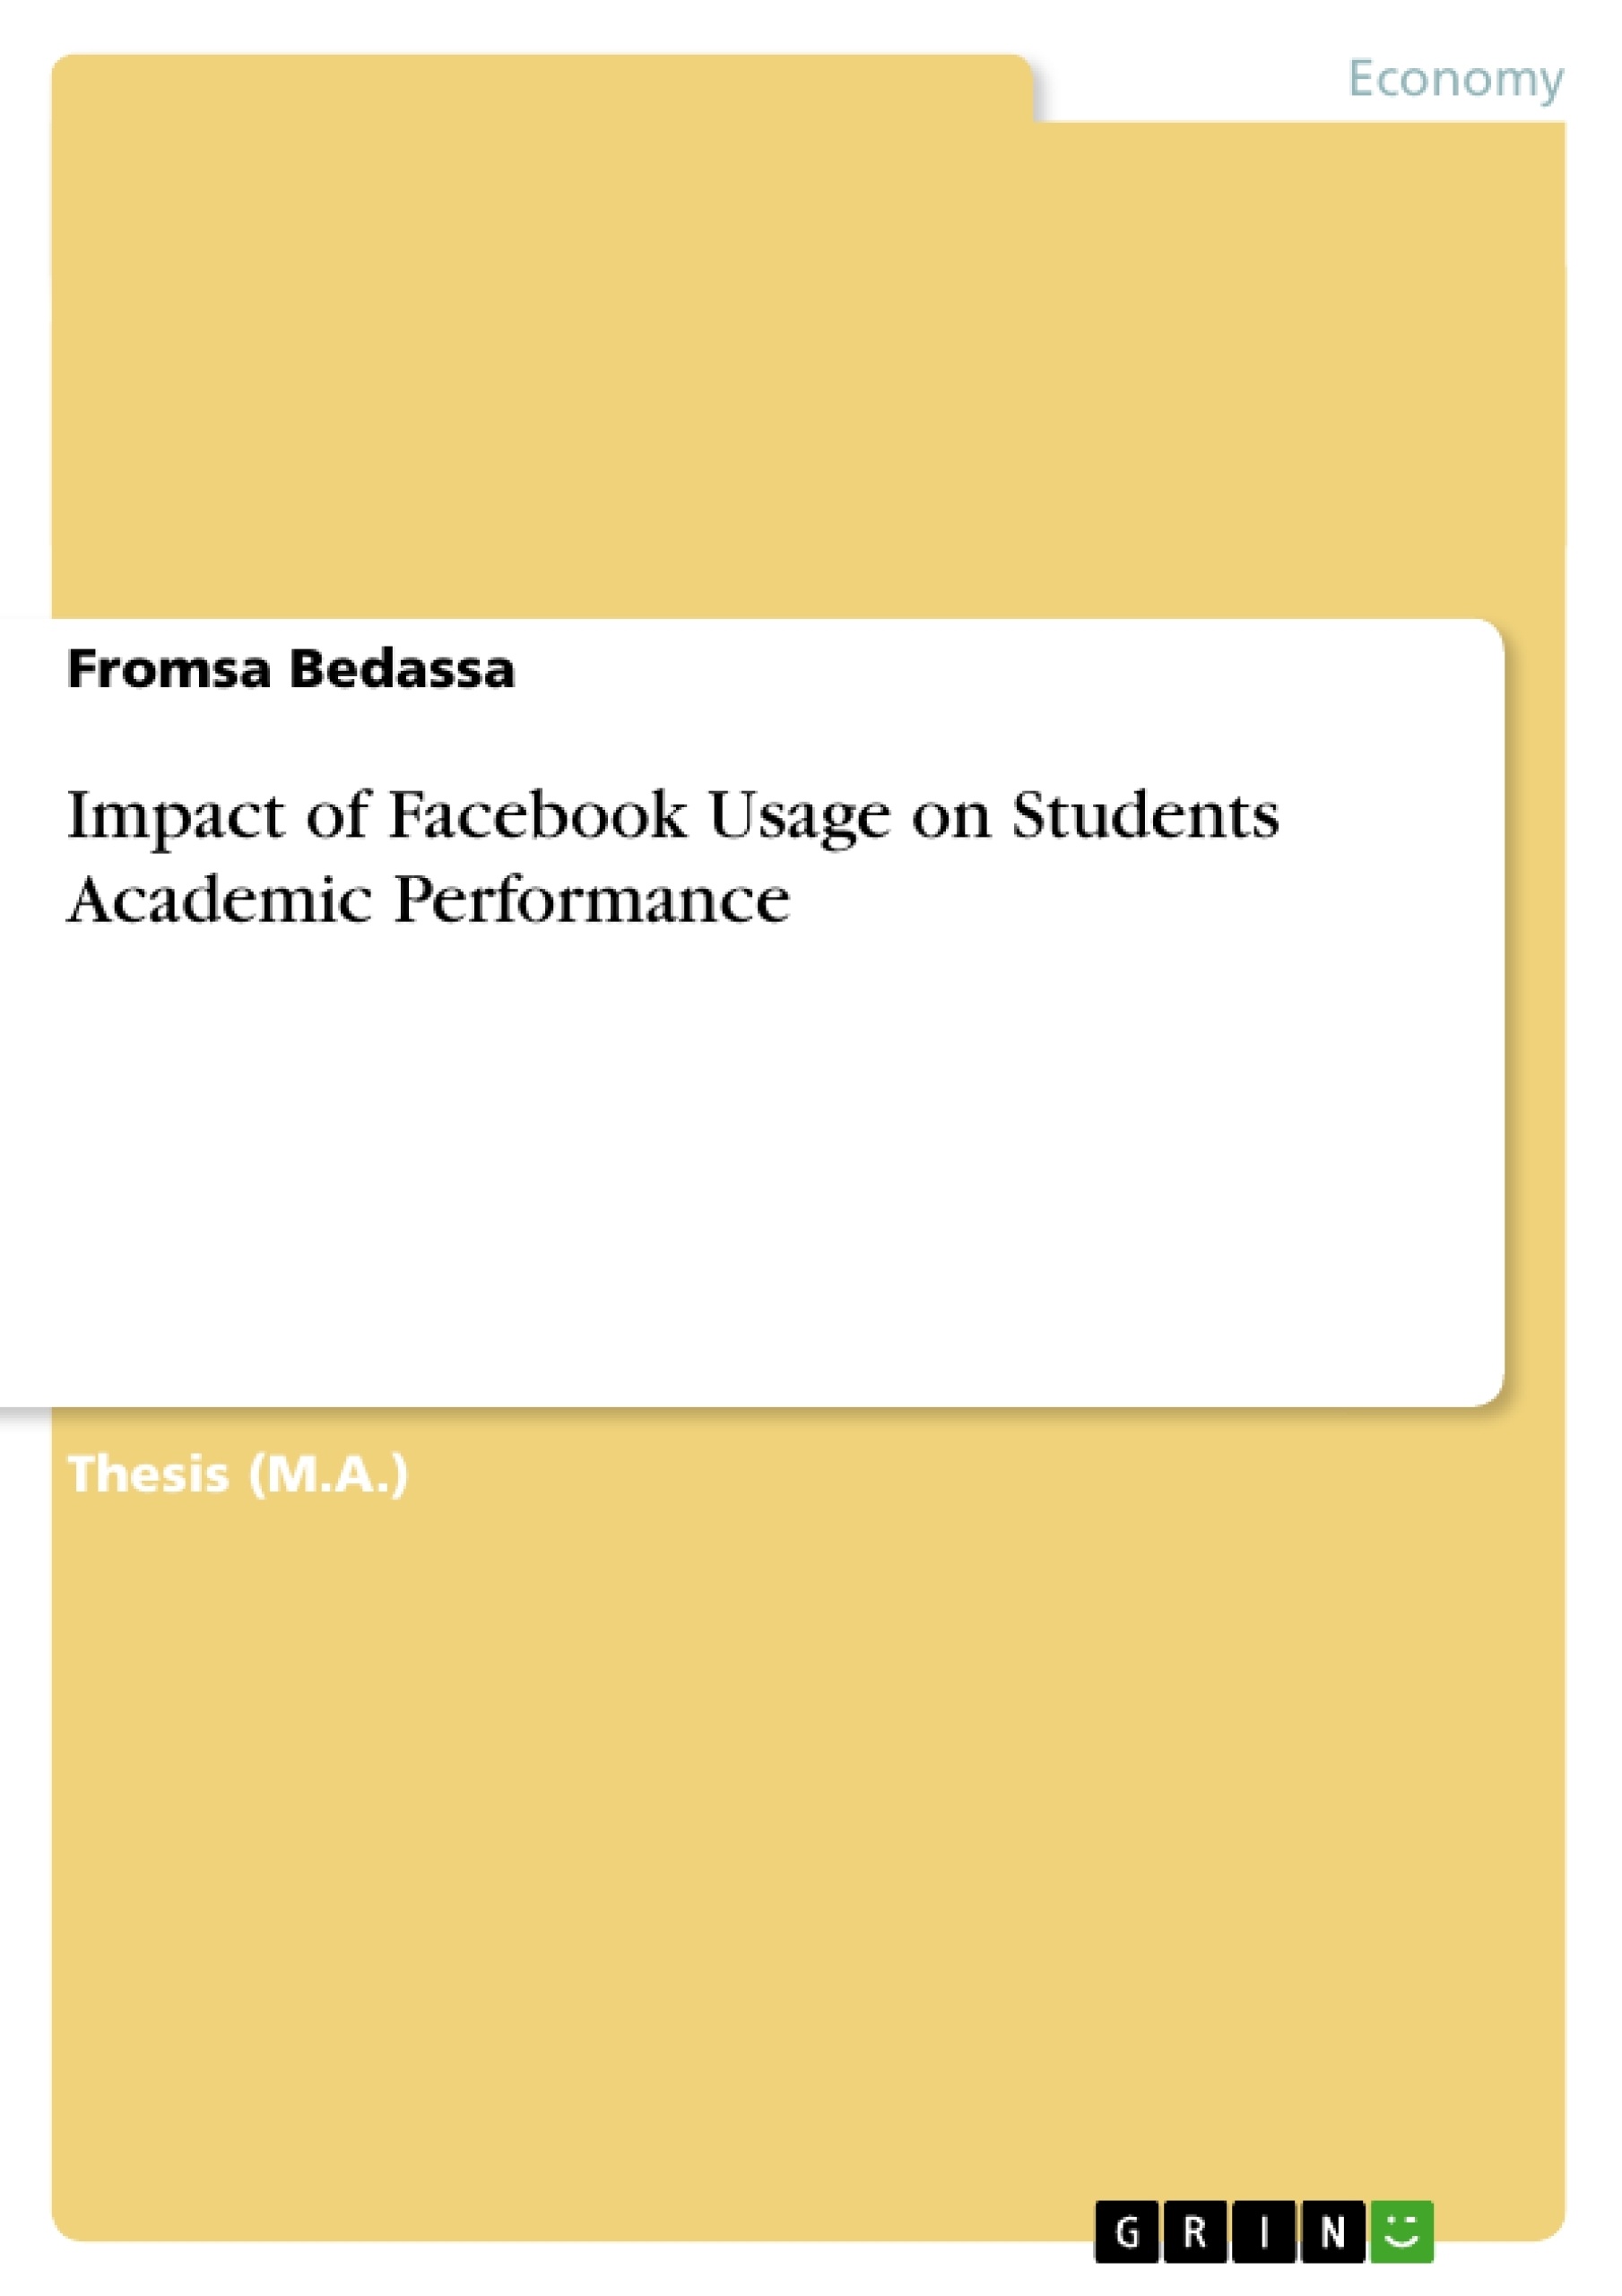 Title: Impact of Facebook Usage on Students Academic Performance